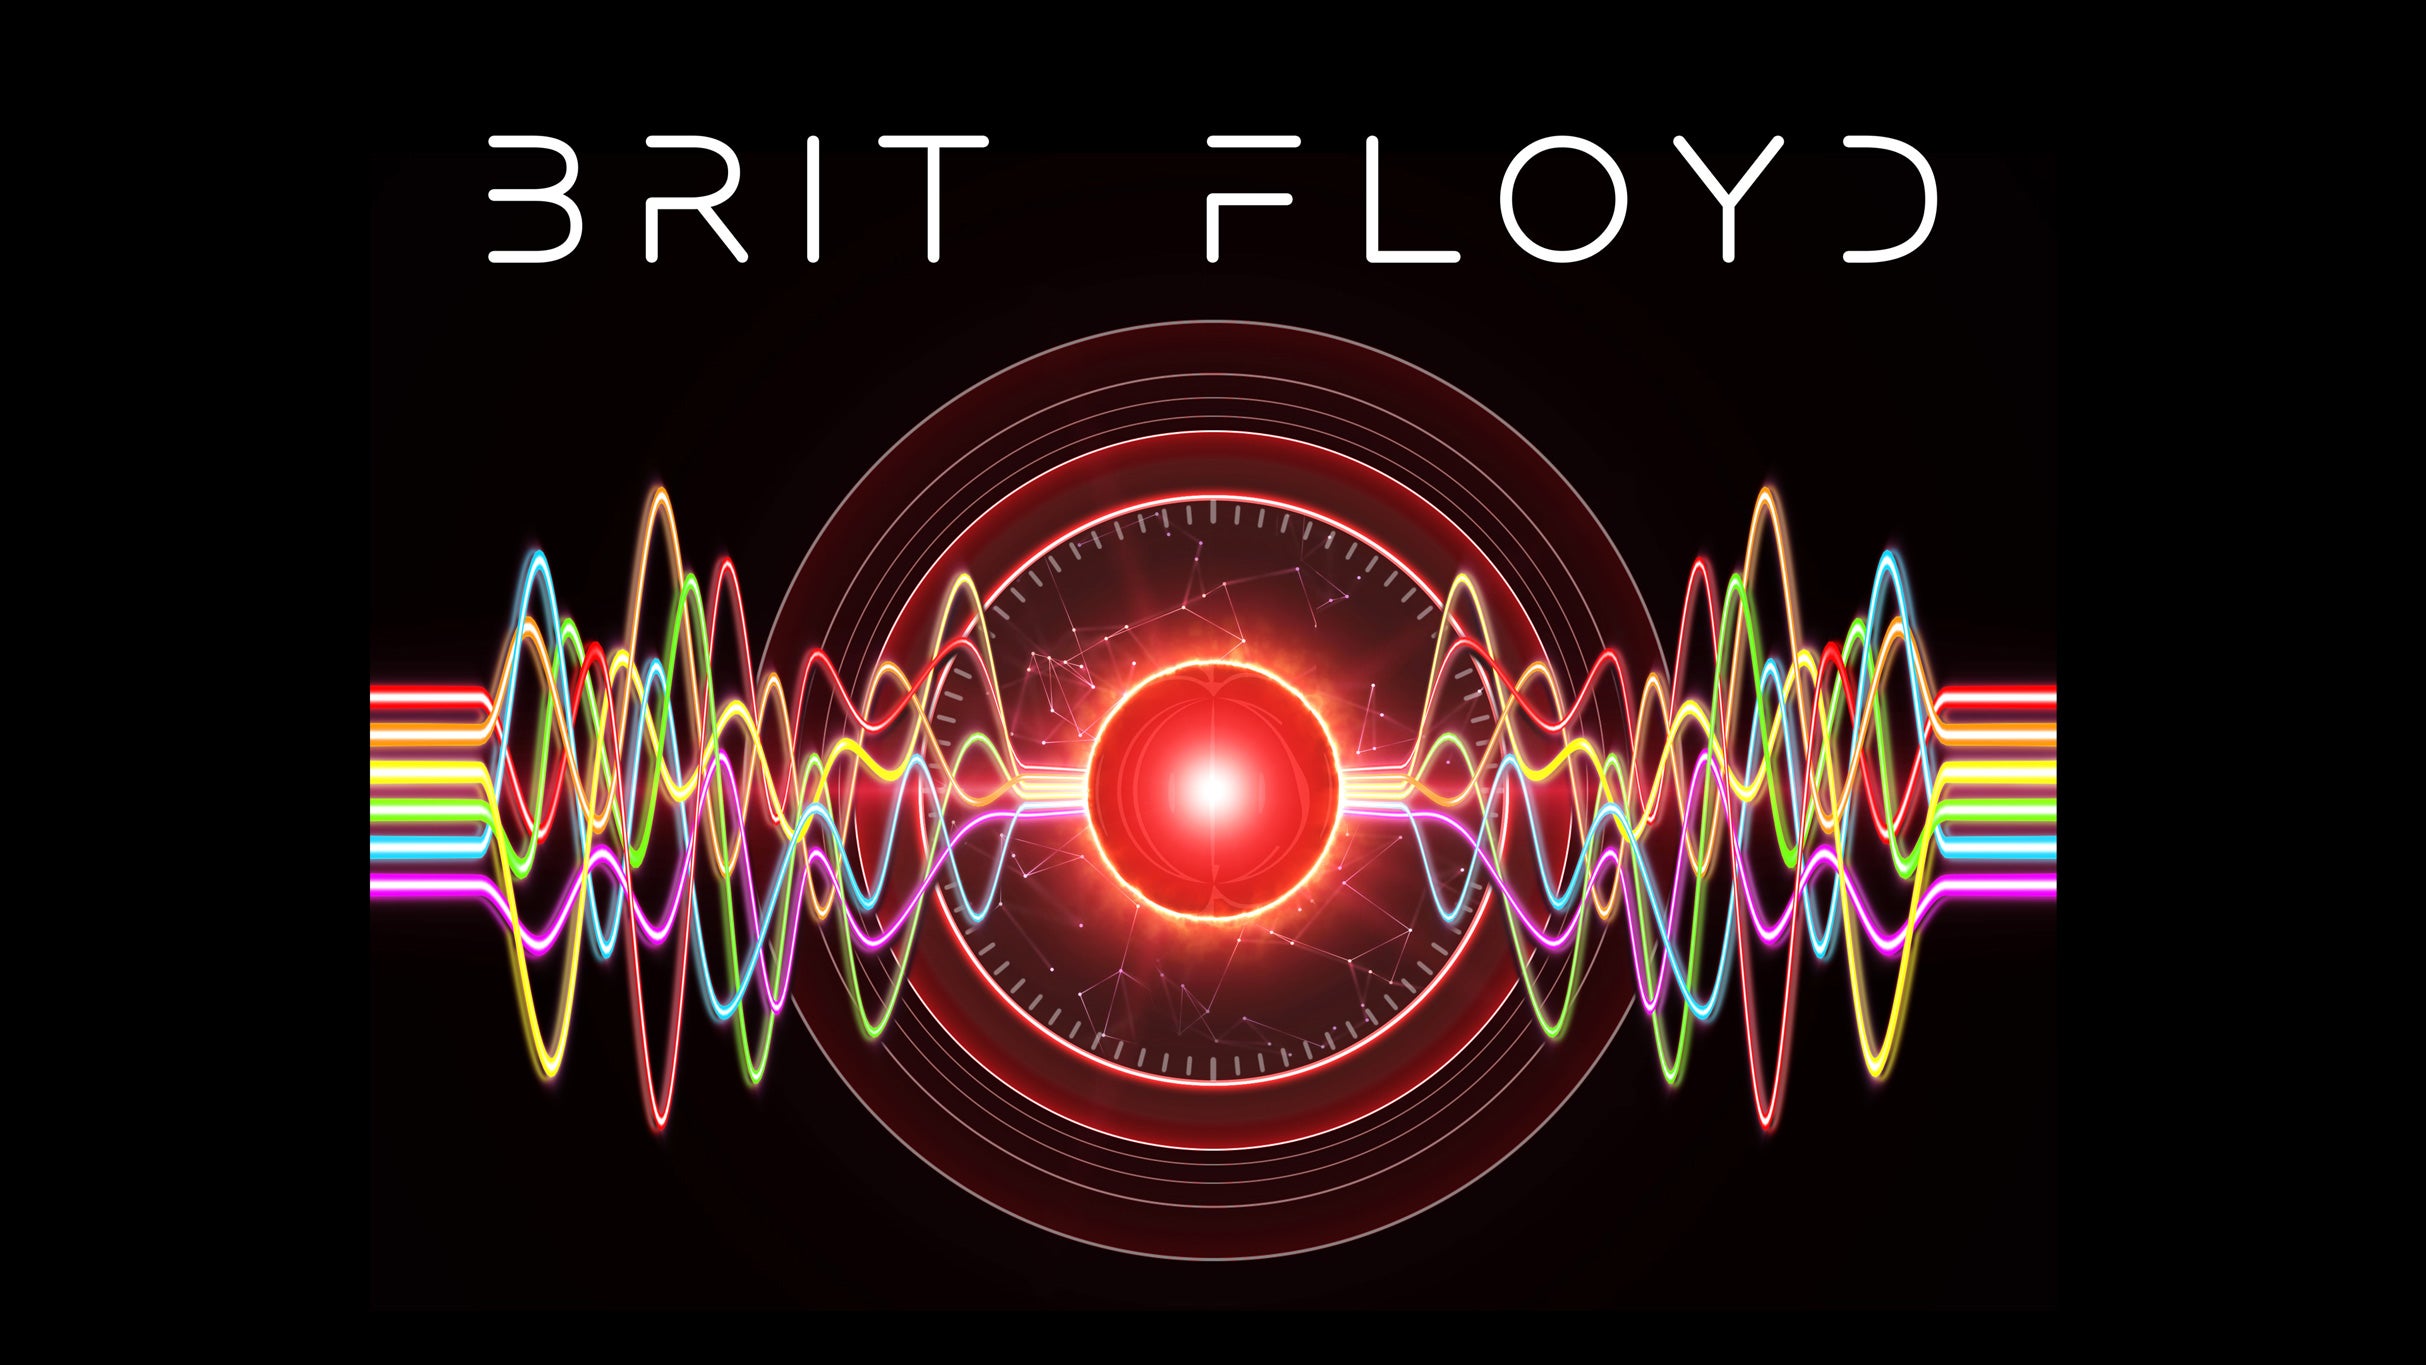 BRIT FLOYD PULSE Celebrating the 30th Anniversary of The Division Bell free presale passcode